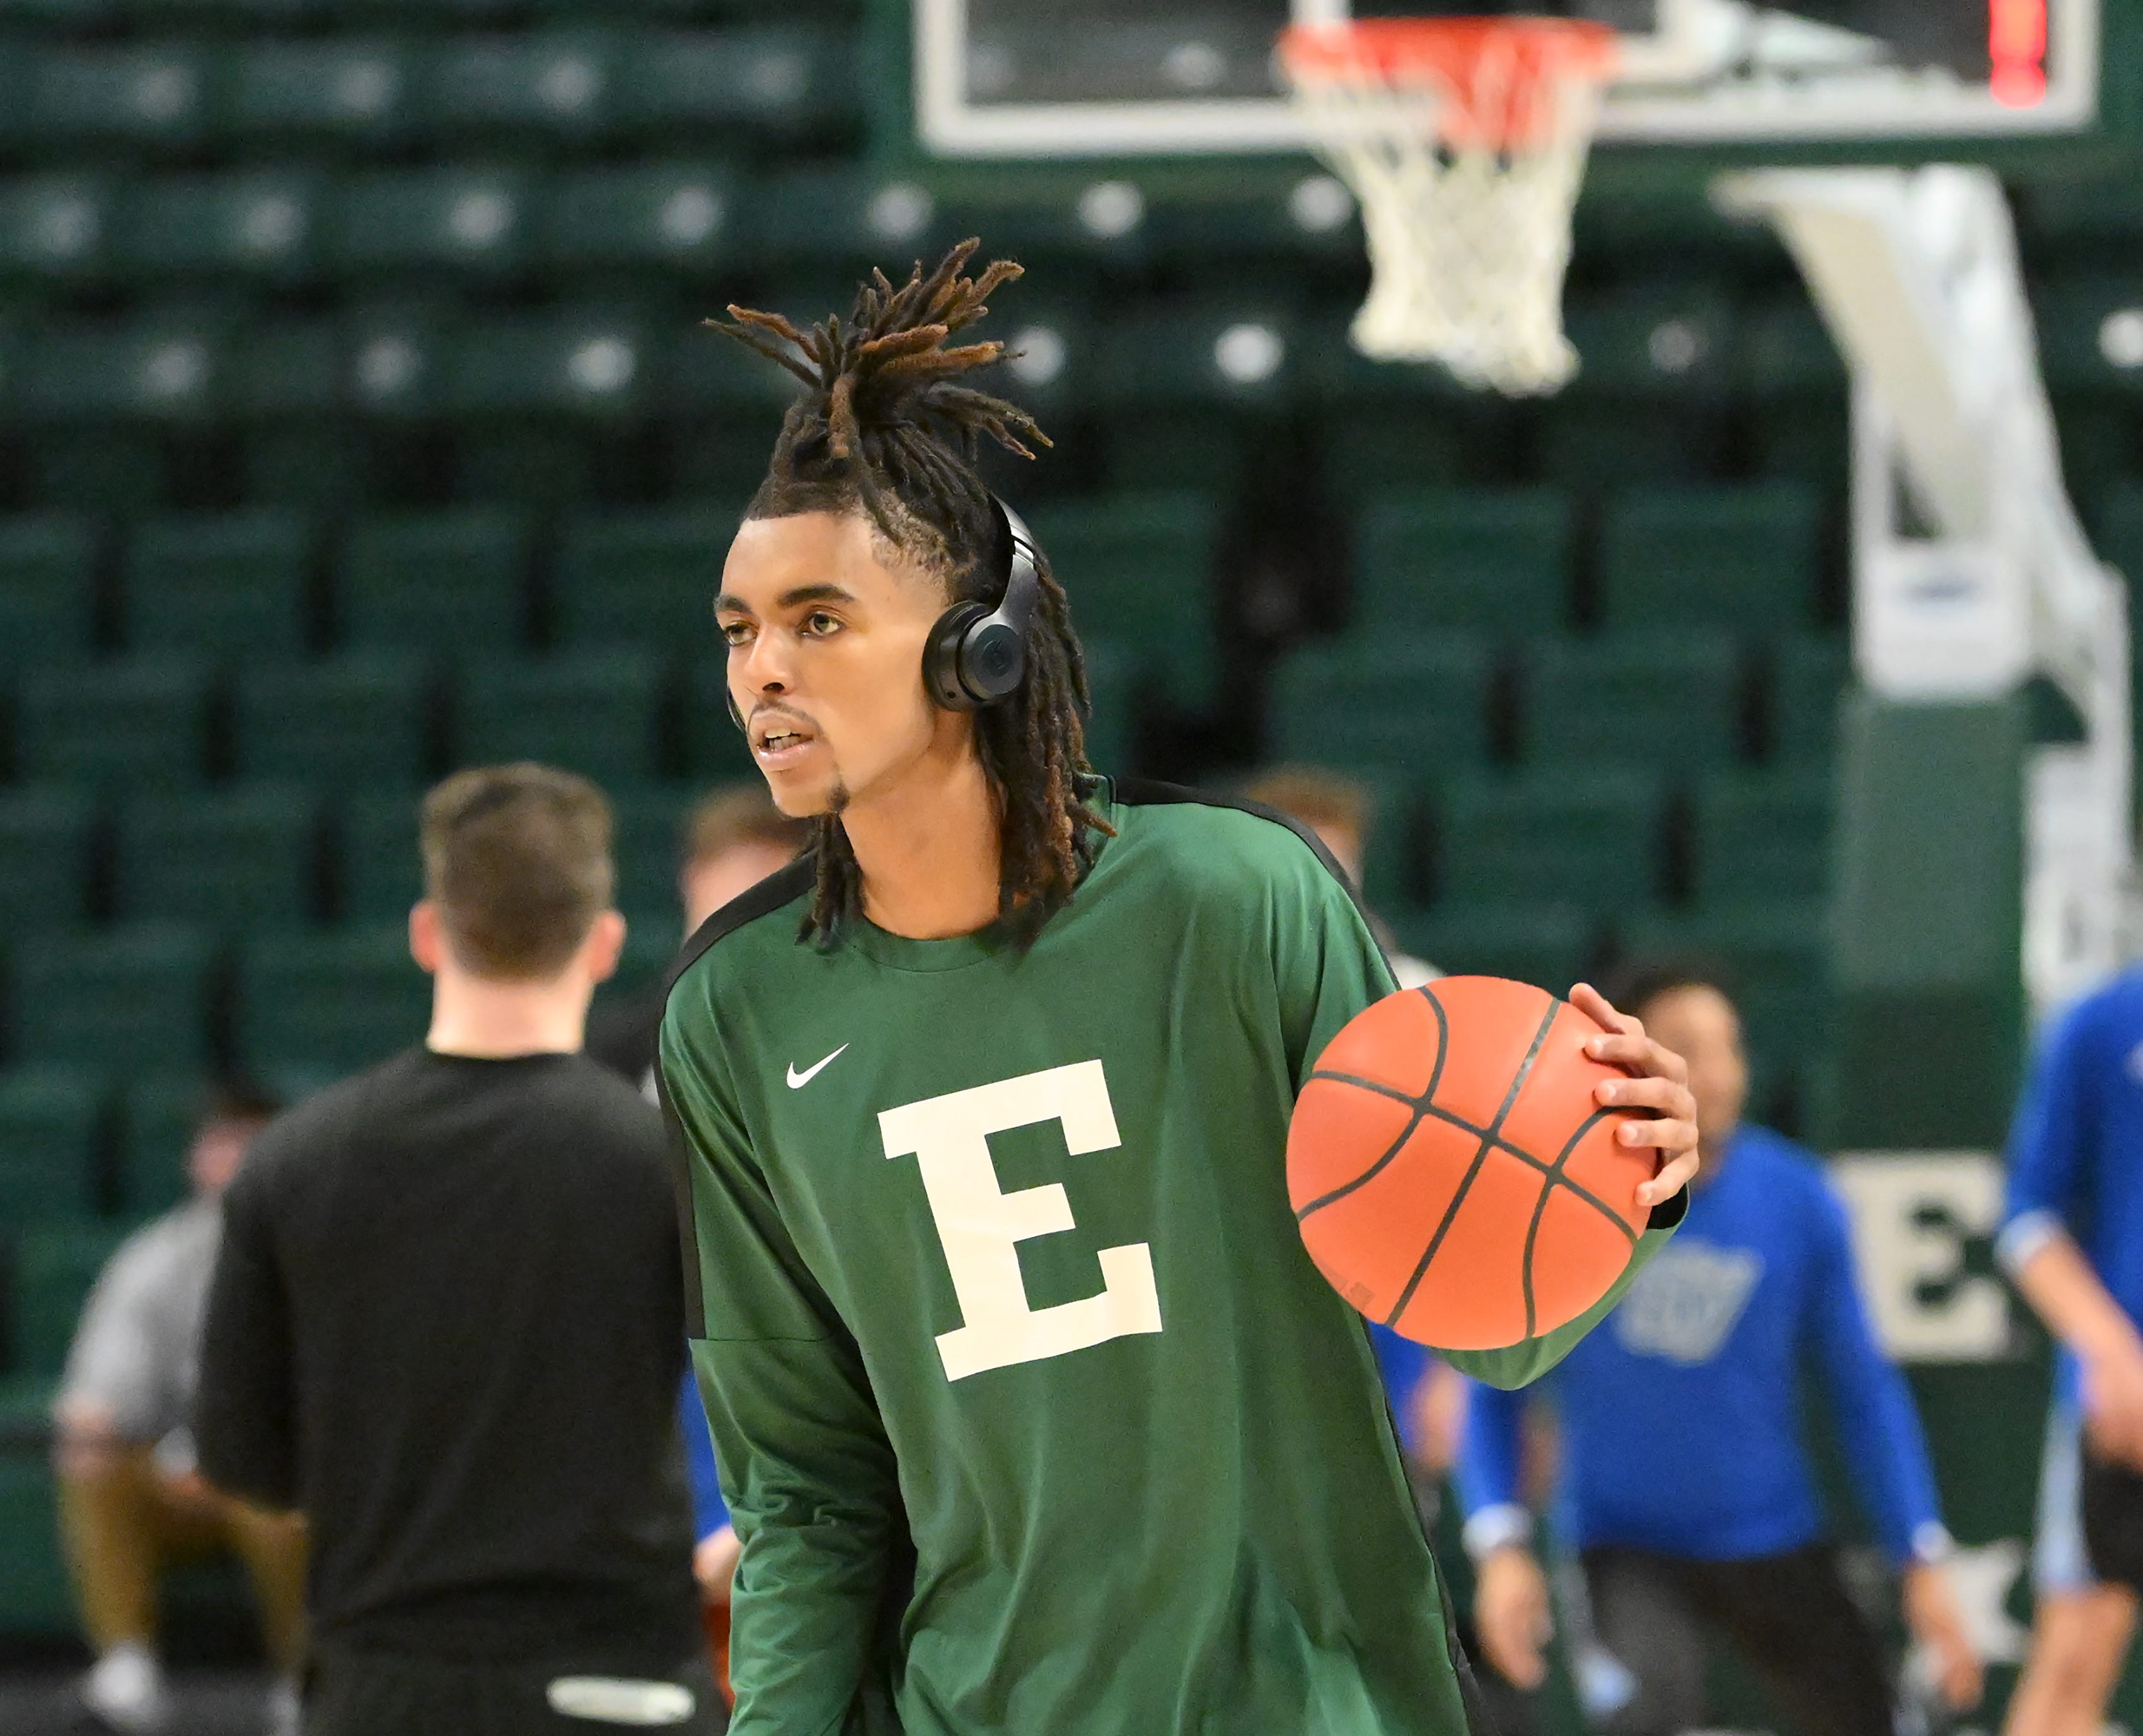 Emoni Bates during warm ups.  Eastern vs Grand Valley in men's basketball exhibition at George Gervin GameAbove Center at Eastern Michigan University in Ypsilanti, Mich. on Oct. 27, 2022.